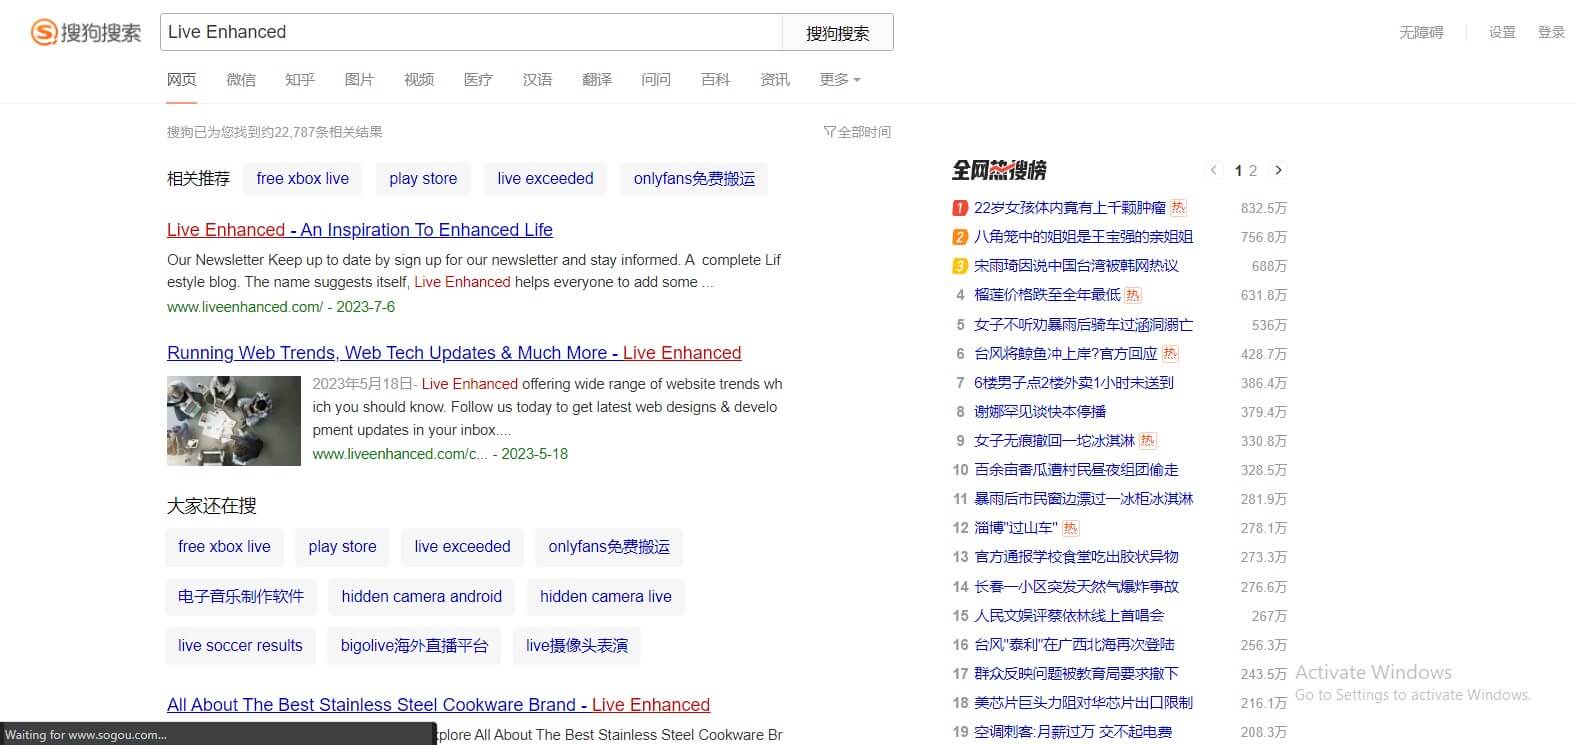 Sogou search engine Search query "Live Enhanced"